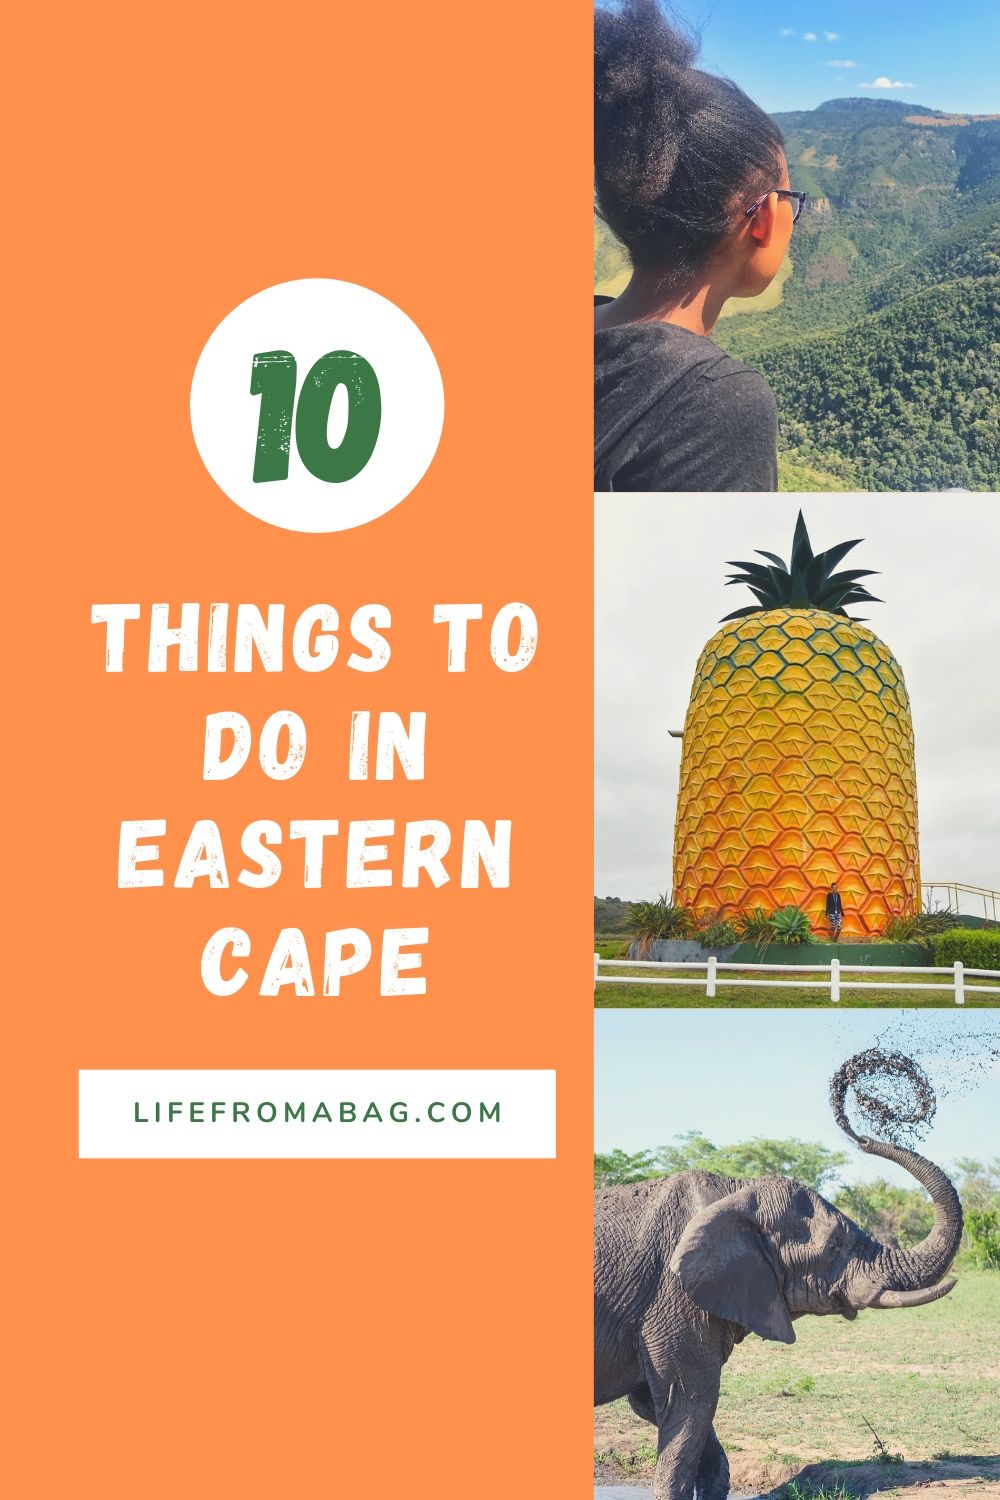 Things to do in Eastern Cape